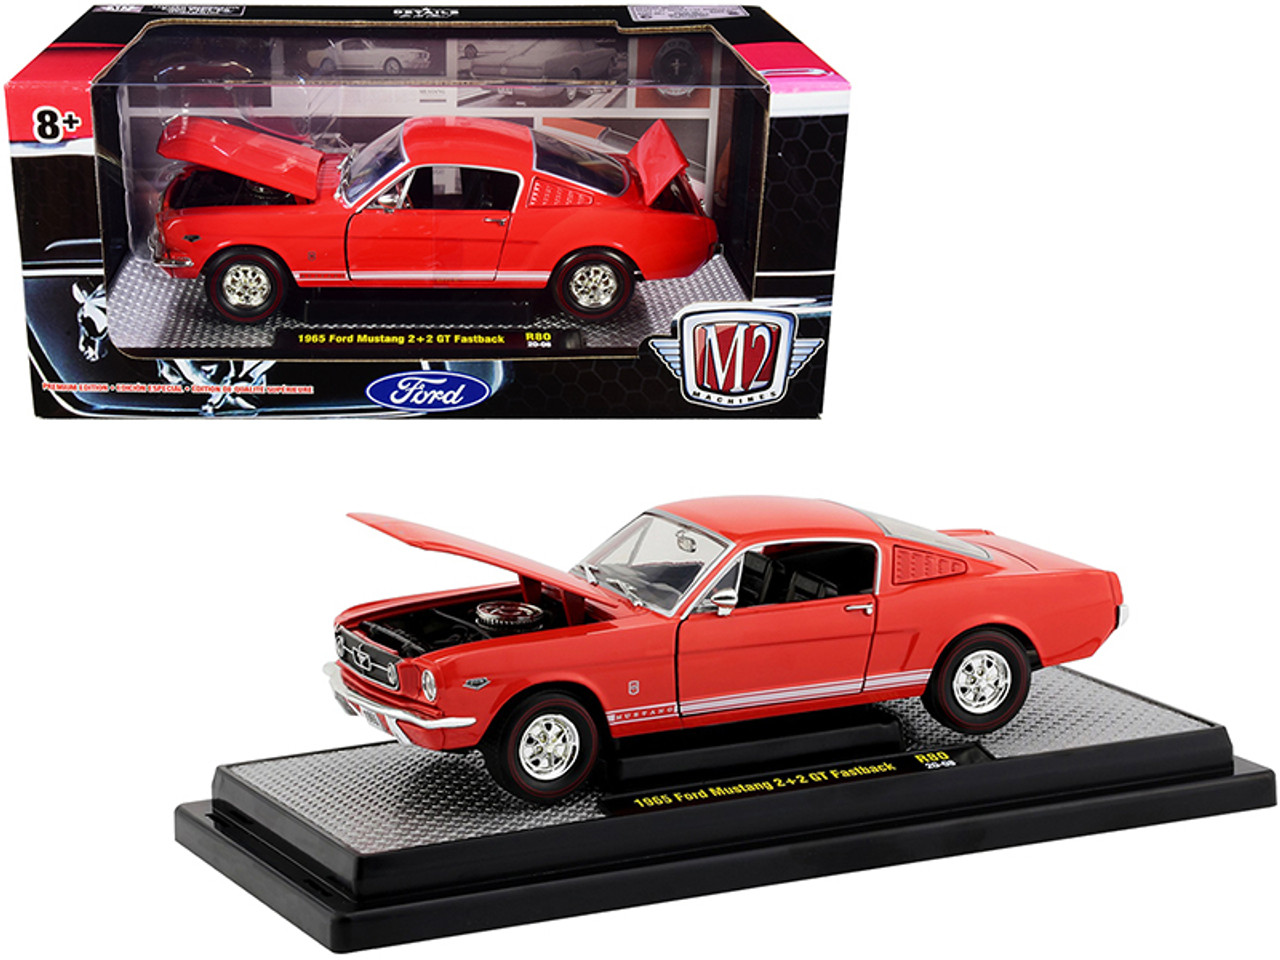 1965 Ford Mustang 2+2 GT Fastback Rangoon Red with White Stripes Limited Edition to 7000 pieces Worldwide 1/24 Diecast Model Car by M2 Machines